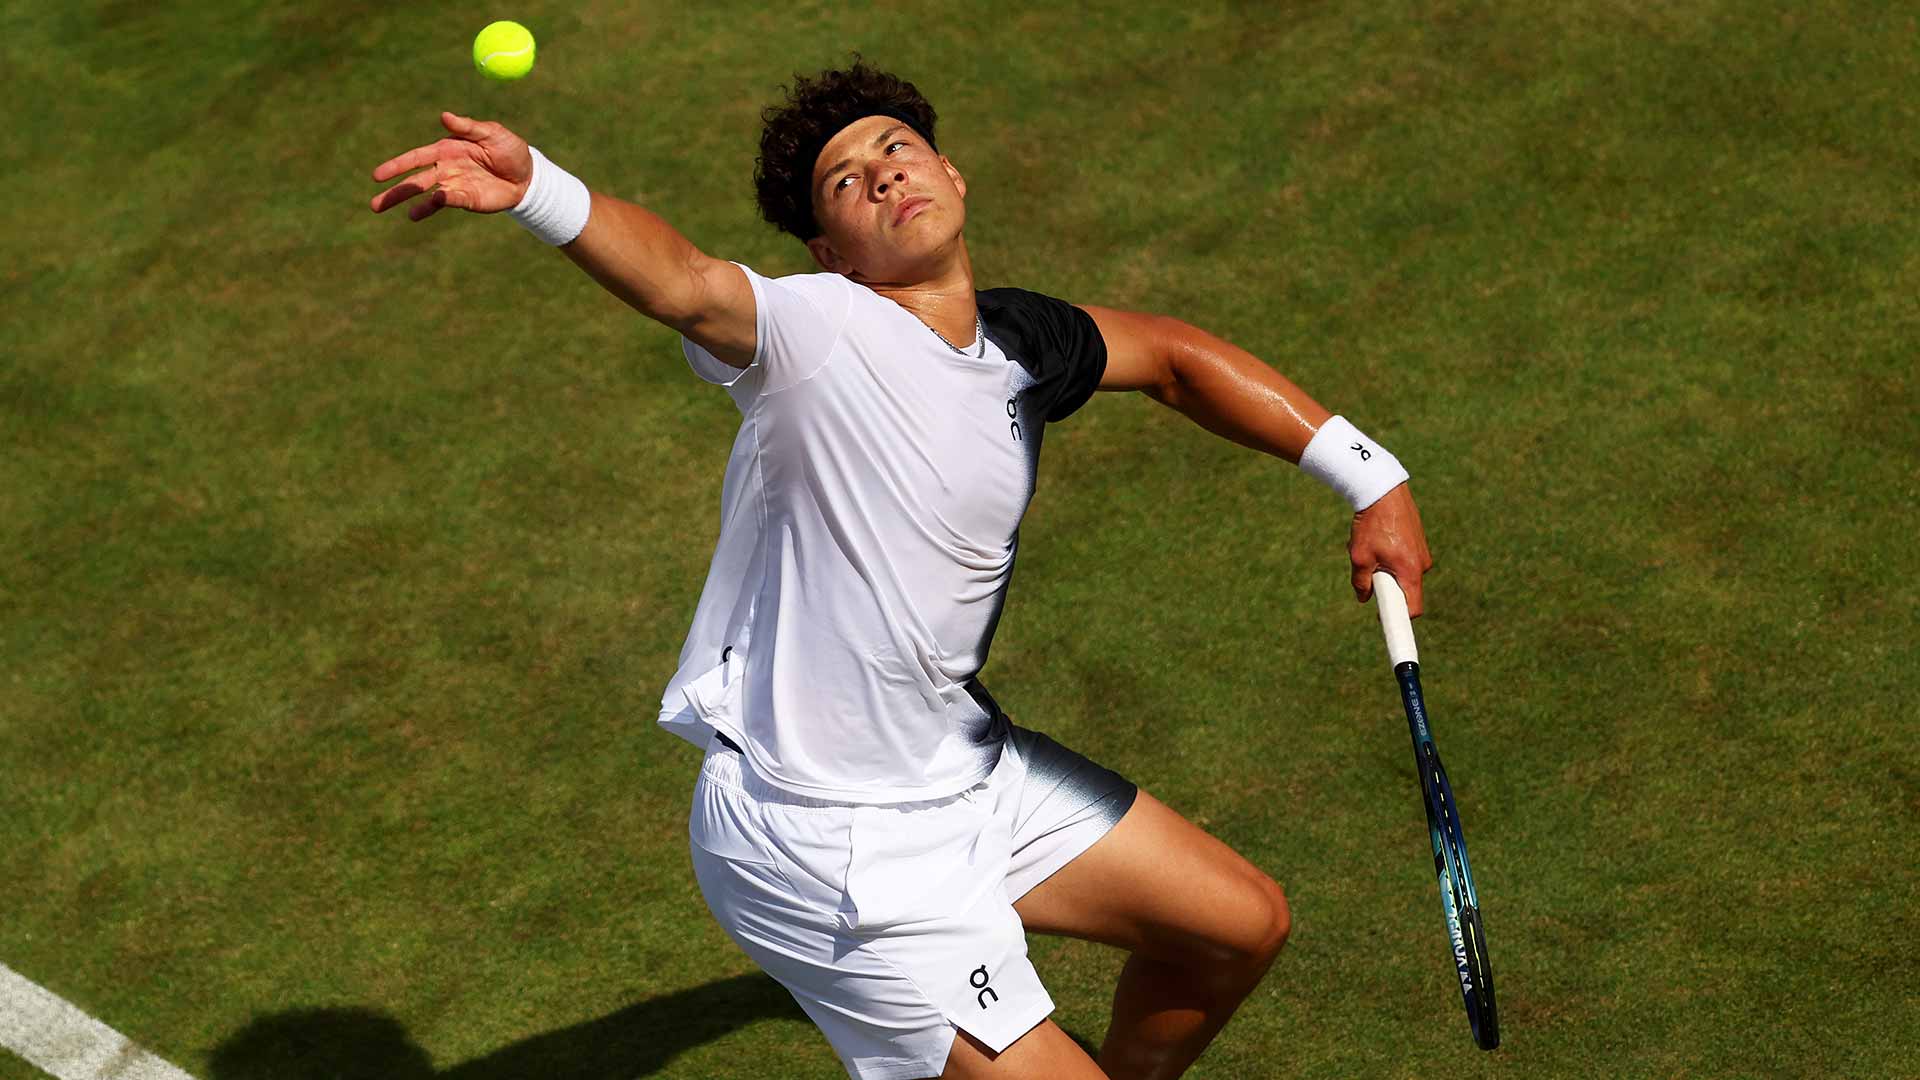 Ben Shelton is making his grass-court debut in London.